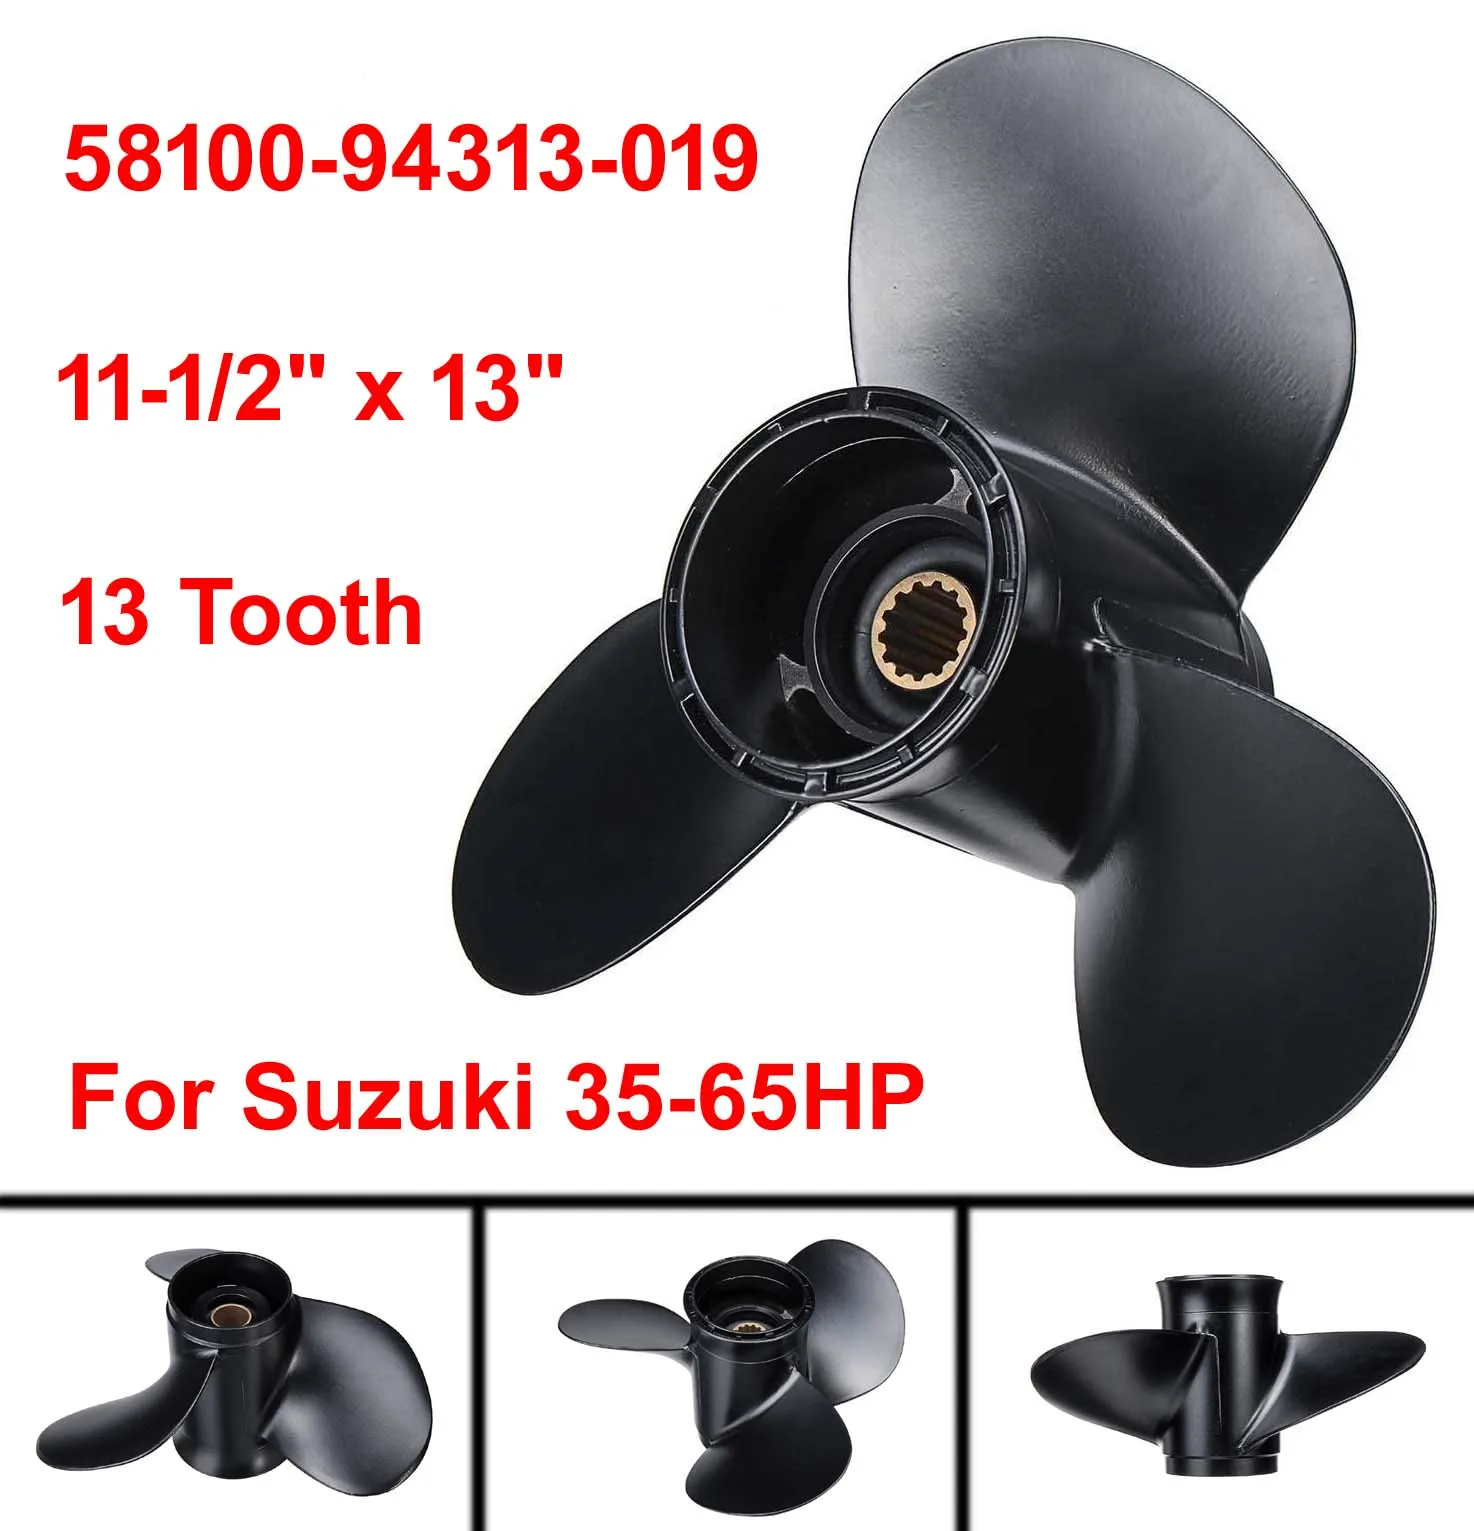 Boat Propeller 11 1/2 X 13 for Suzuki Outboard 35-65HP Motor Engine 13 Tooth Spline Outboard Propellers 58100-94313-019 11.5x13 in stock dji t30 drone foldable propeller 3820 carbon fiber propellers cw